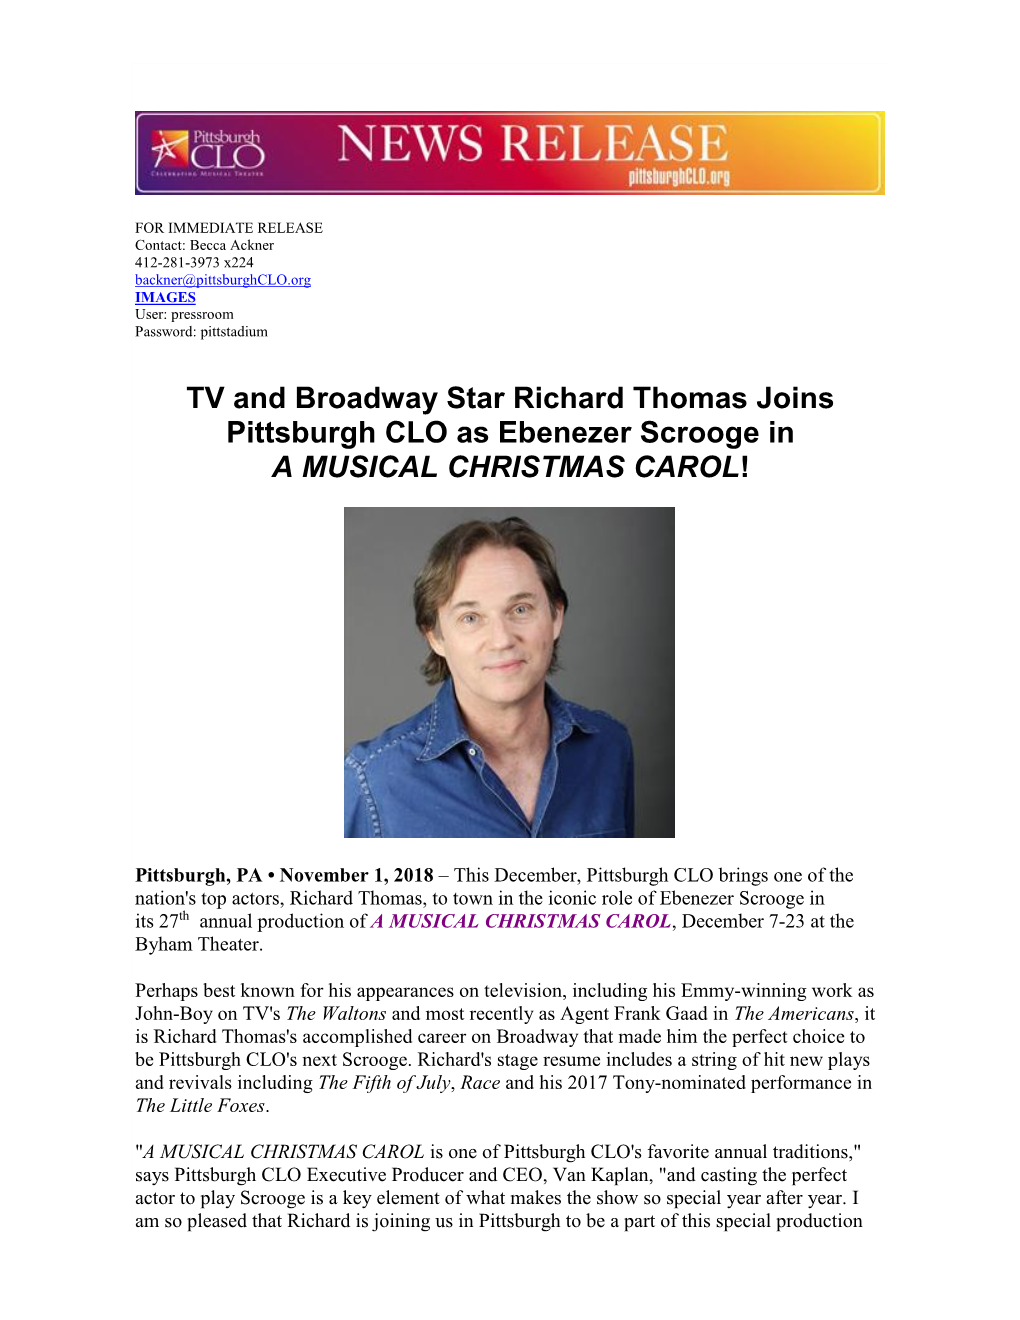 TV and Broadway Star Richard Thomas Joins Pittsburgh CLO As Ebenezer Scrooge in a MUSICAL CHRISTMAS CAROL!